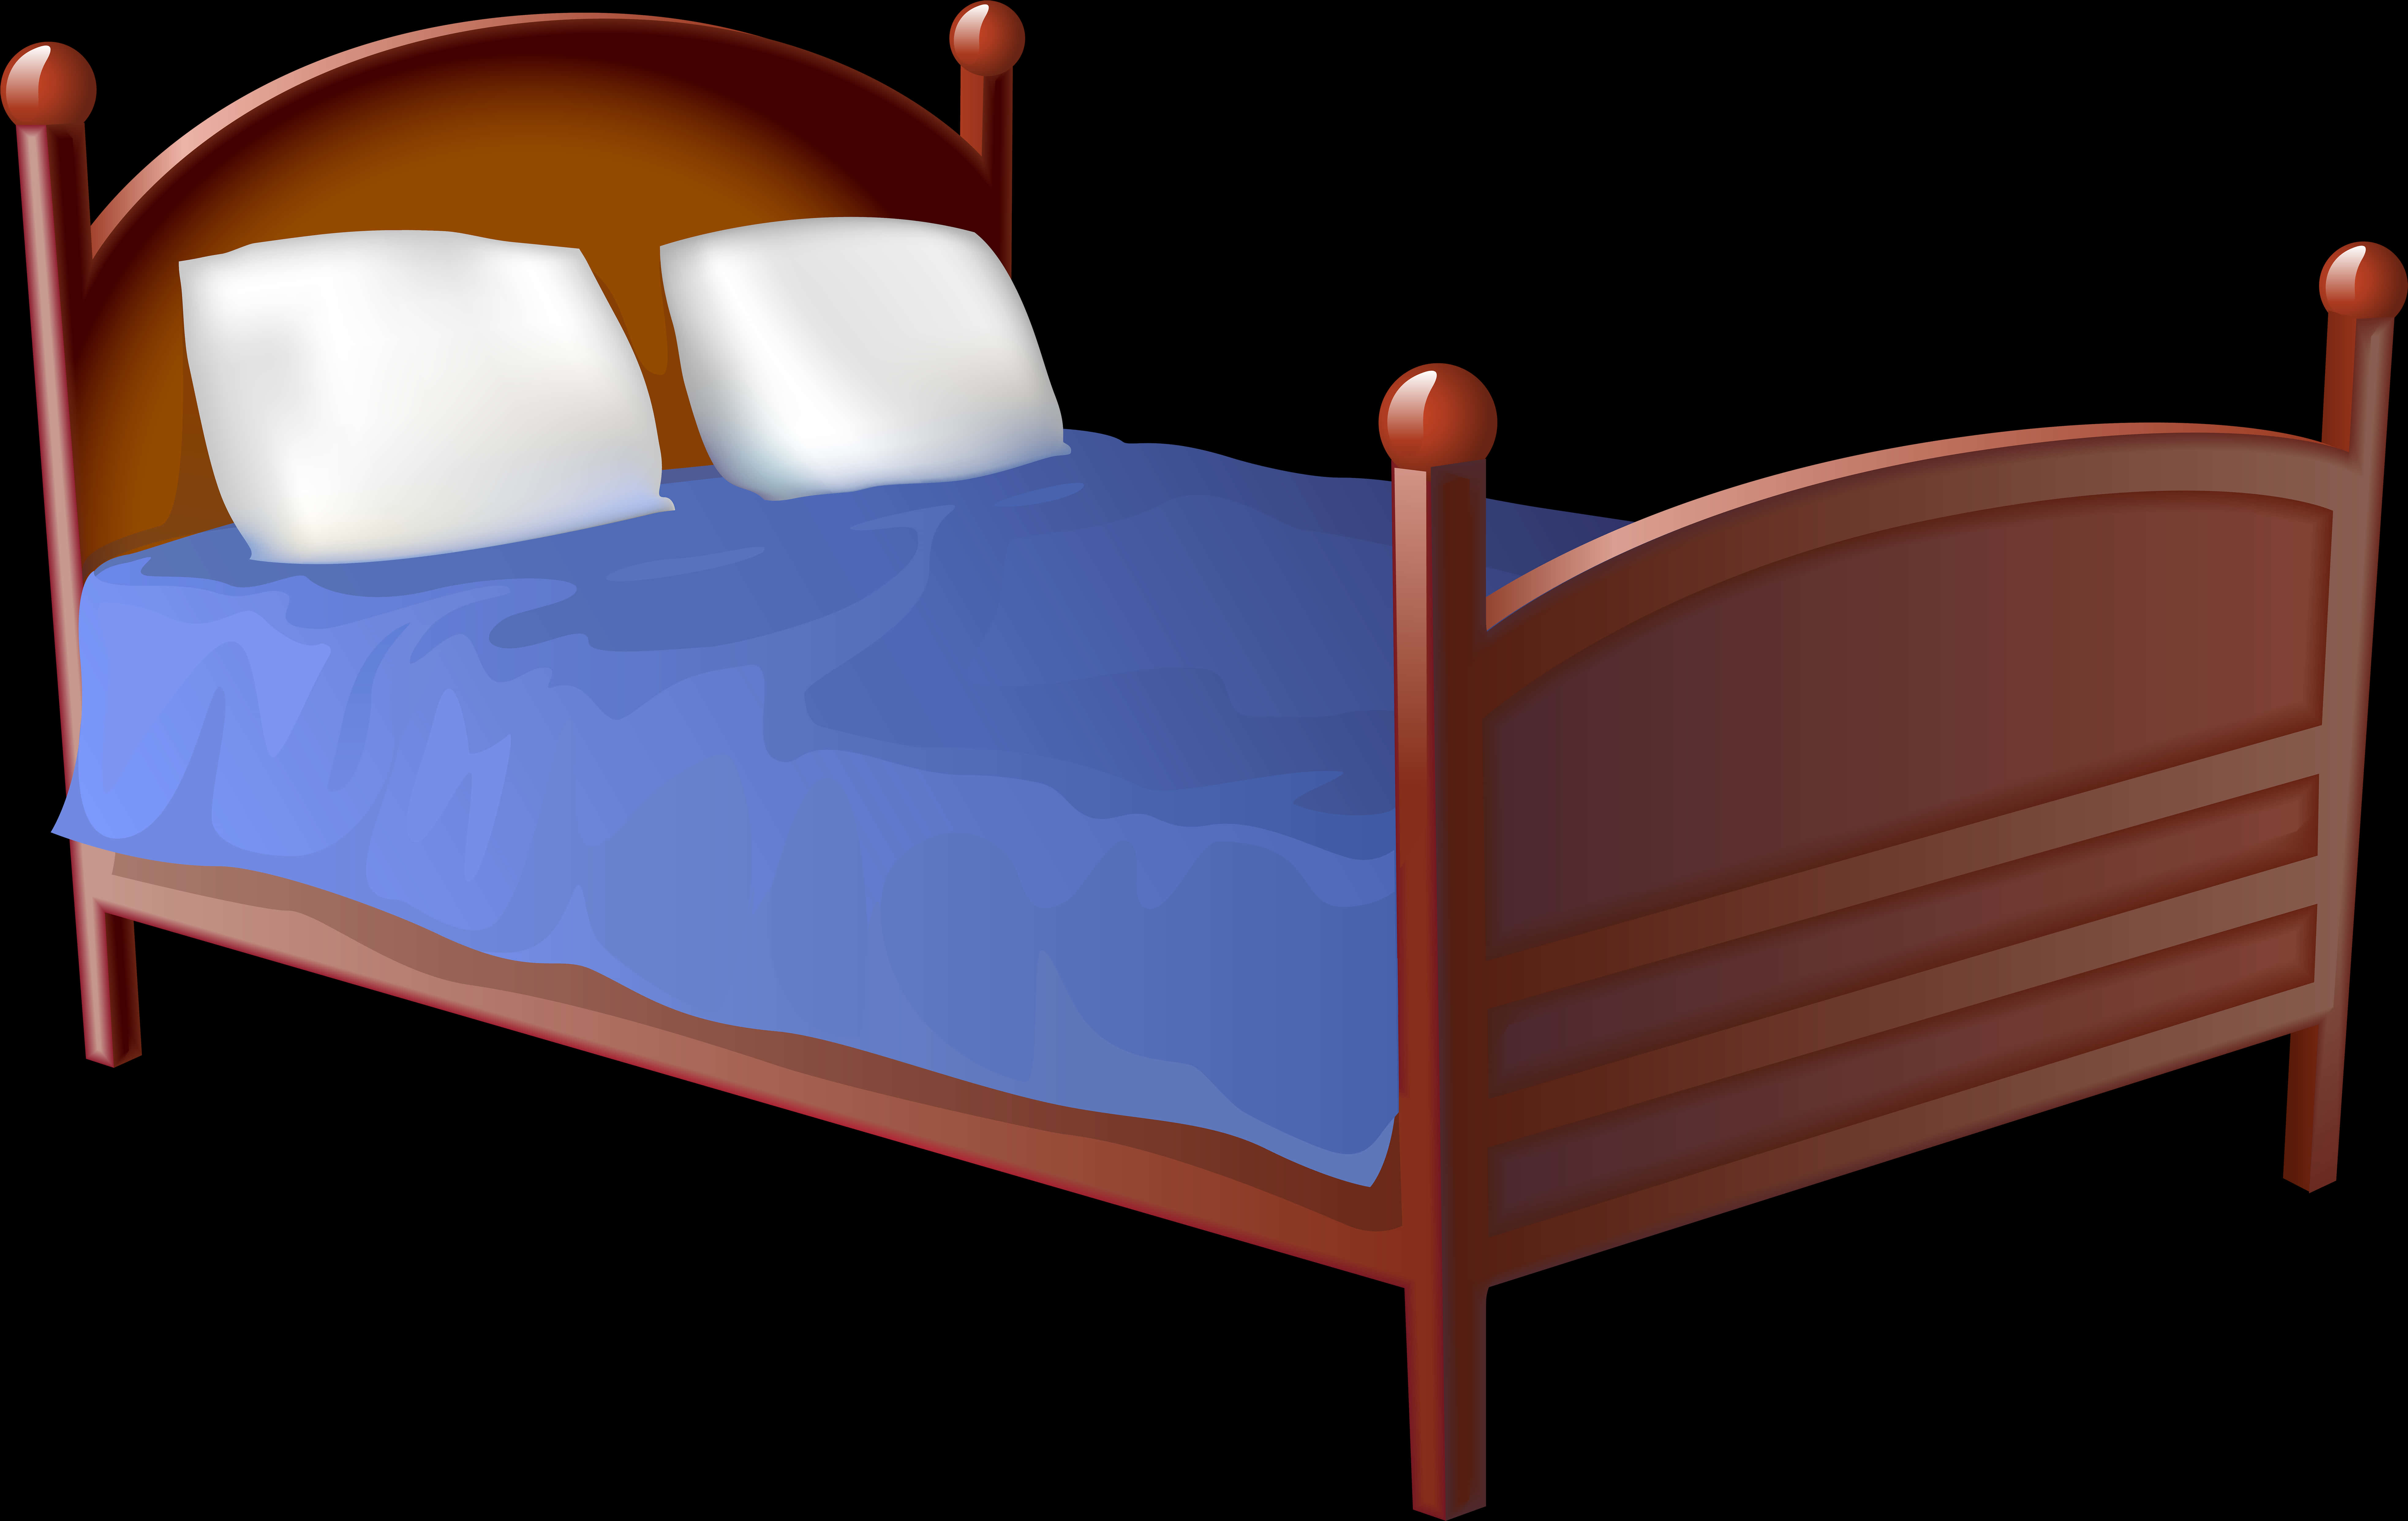 A Bed With Blue Blanket And Pillows